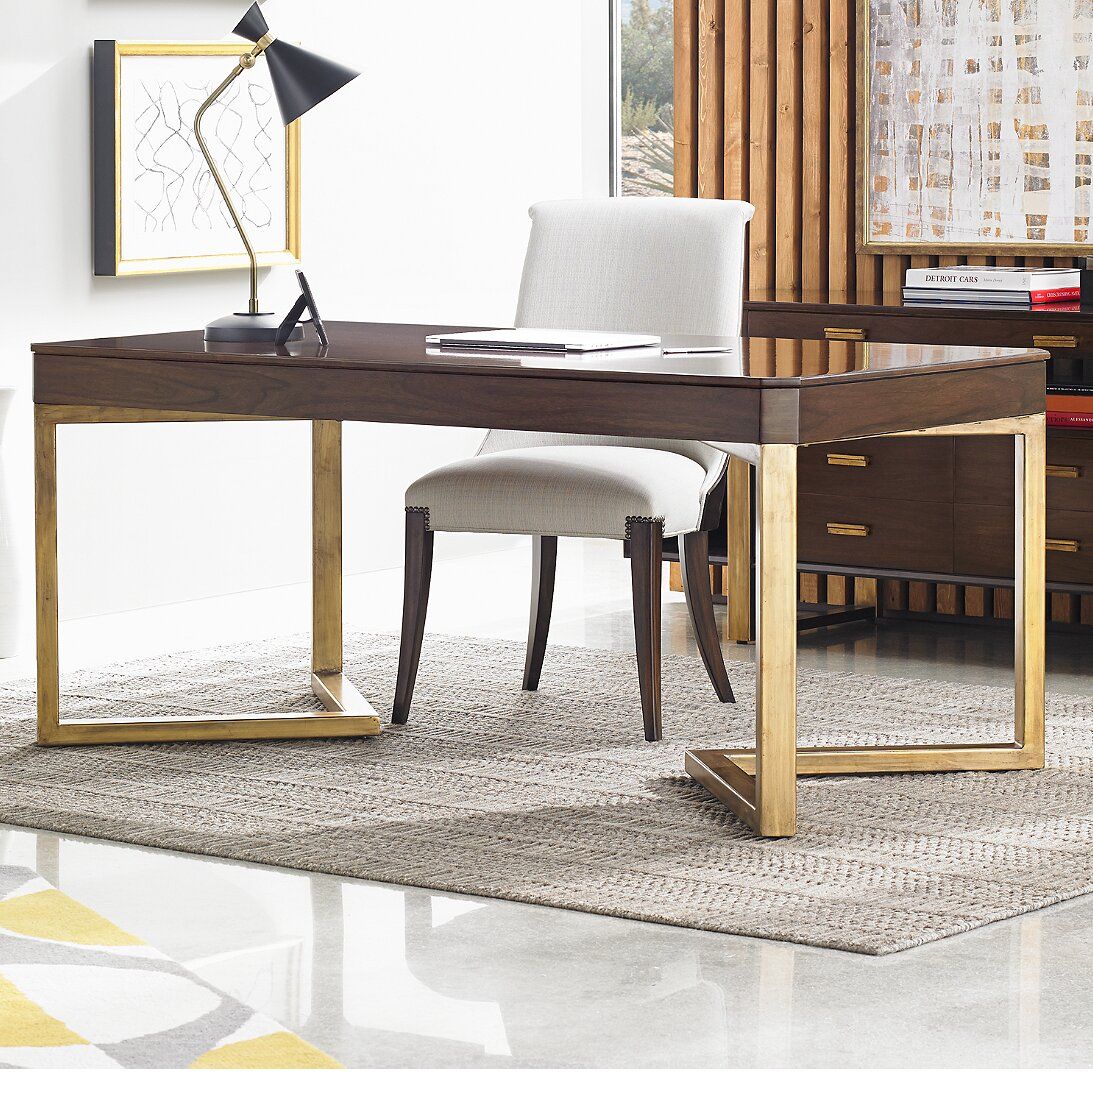 Stanley Crestaire Vincennes Writing Desk & Reviews | Wayfair In Gold And Pink Writing Desks (View 2 of 15)